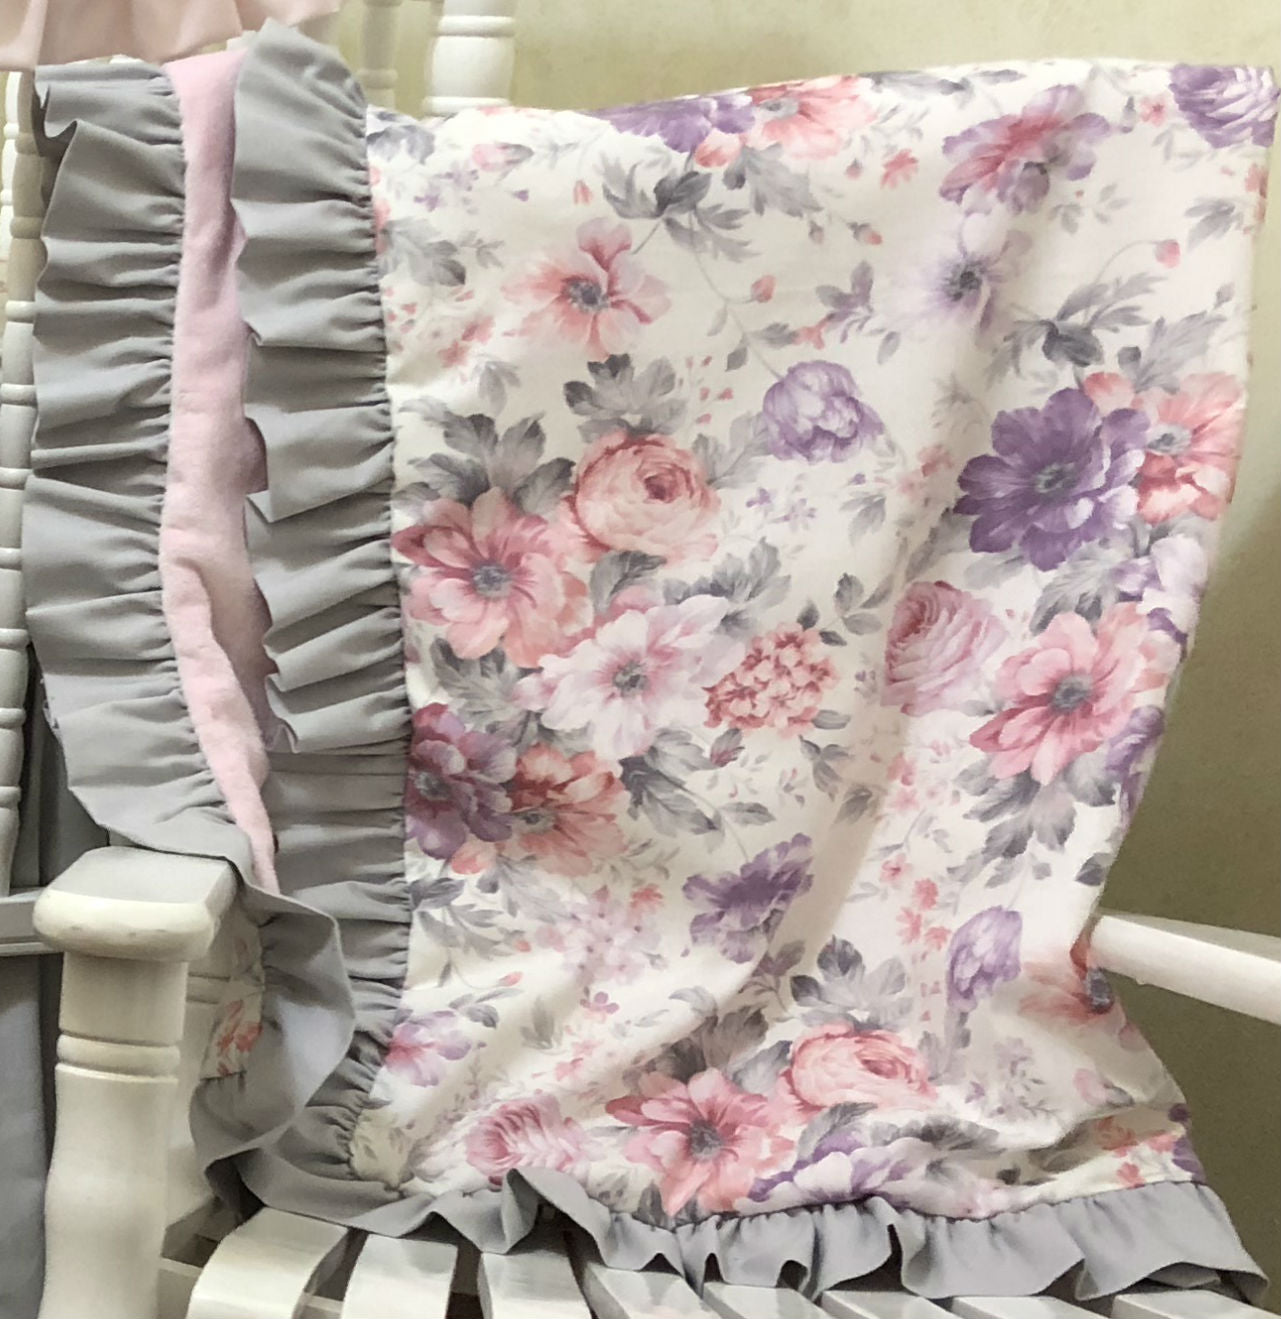 floral baby bedding